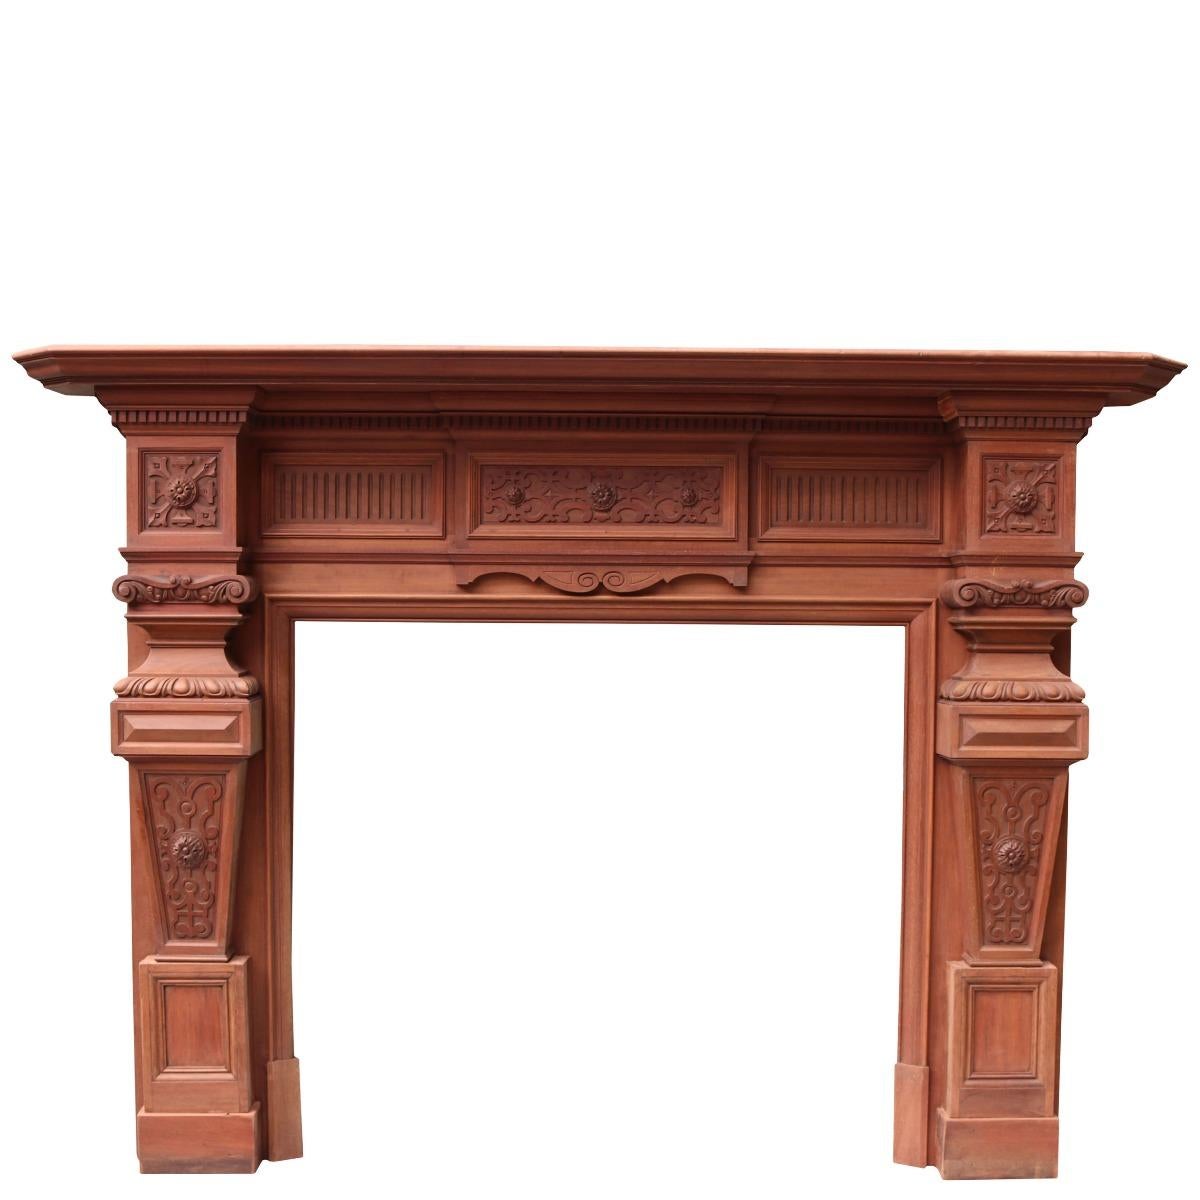 A good quality late 19th century Mahogany fire surround. Reclaimed from a property in North London.

Additional Dimensions:

Opening Height 100.5 cm

Opening Width 112 cm

Width between outside of legs 172 cm.